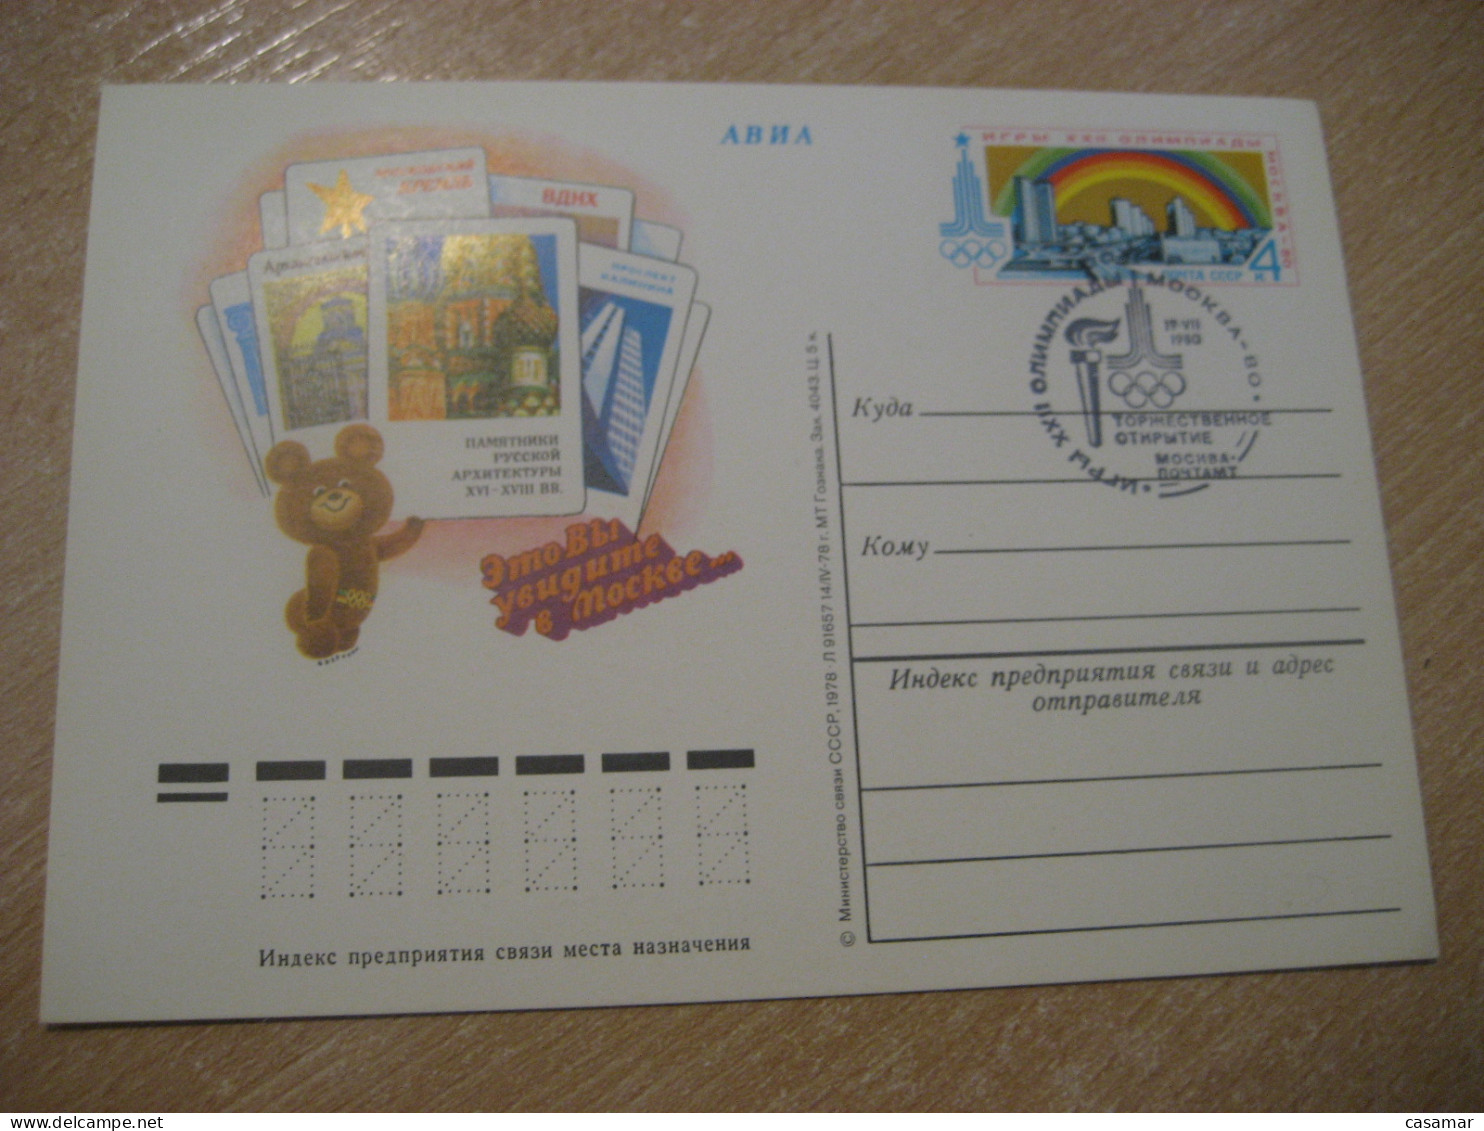 1980 Olympic Mascot Moscow Olympic Games Olympics Torch Cancel Postal Stationery Card RUSSIA USSR - Estate 1980: Mosca